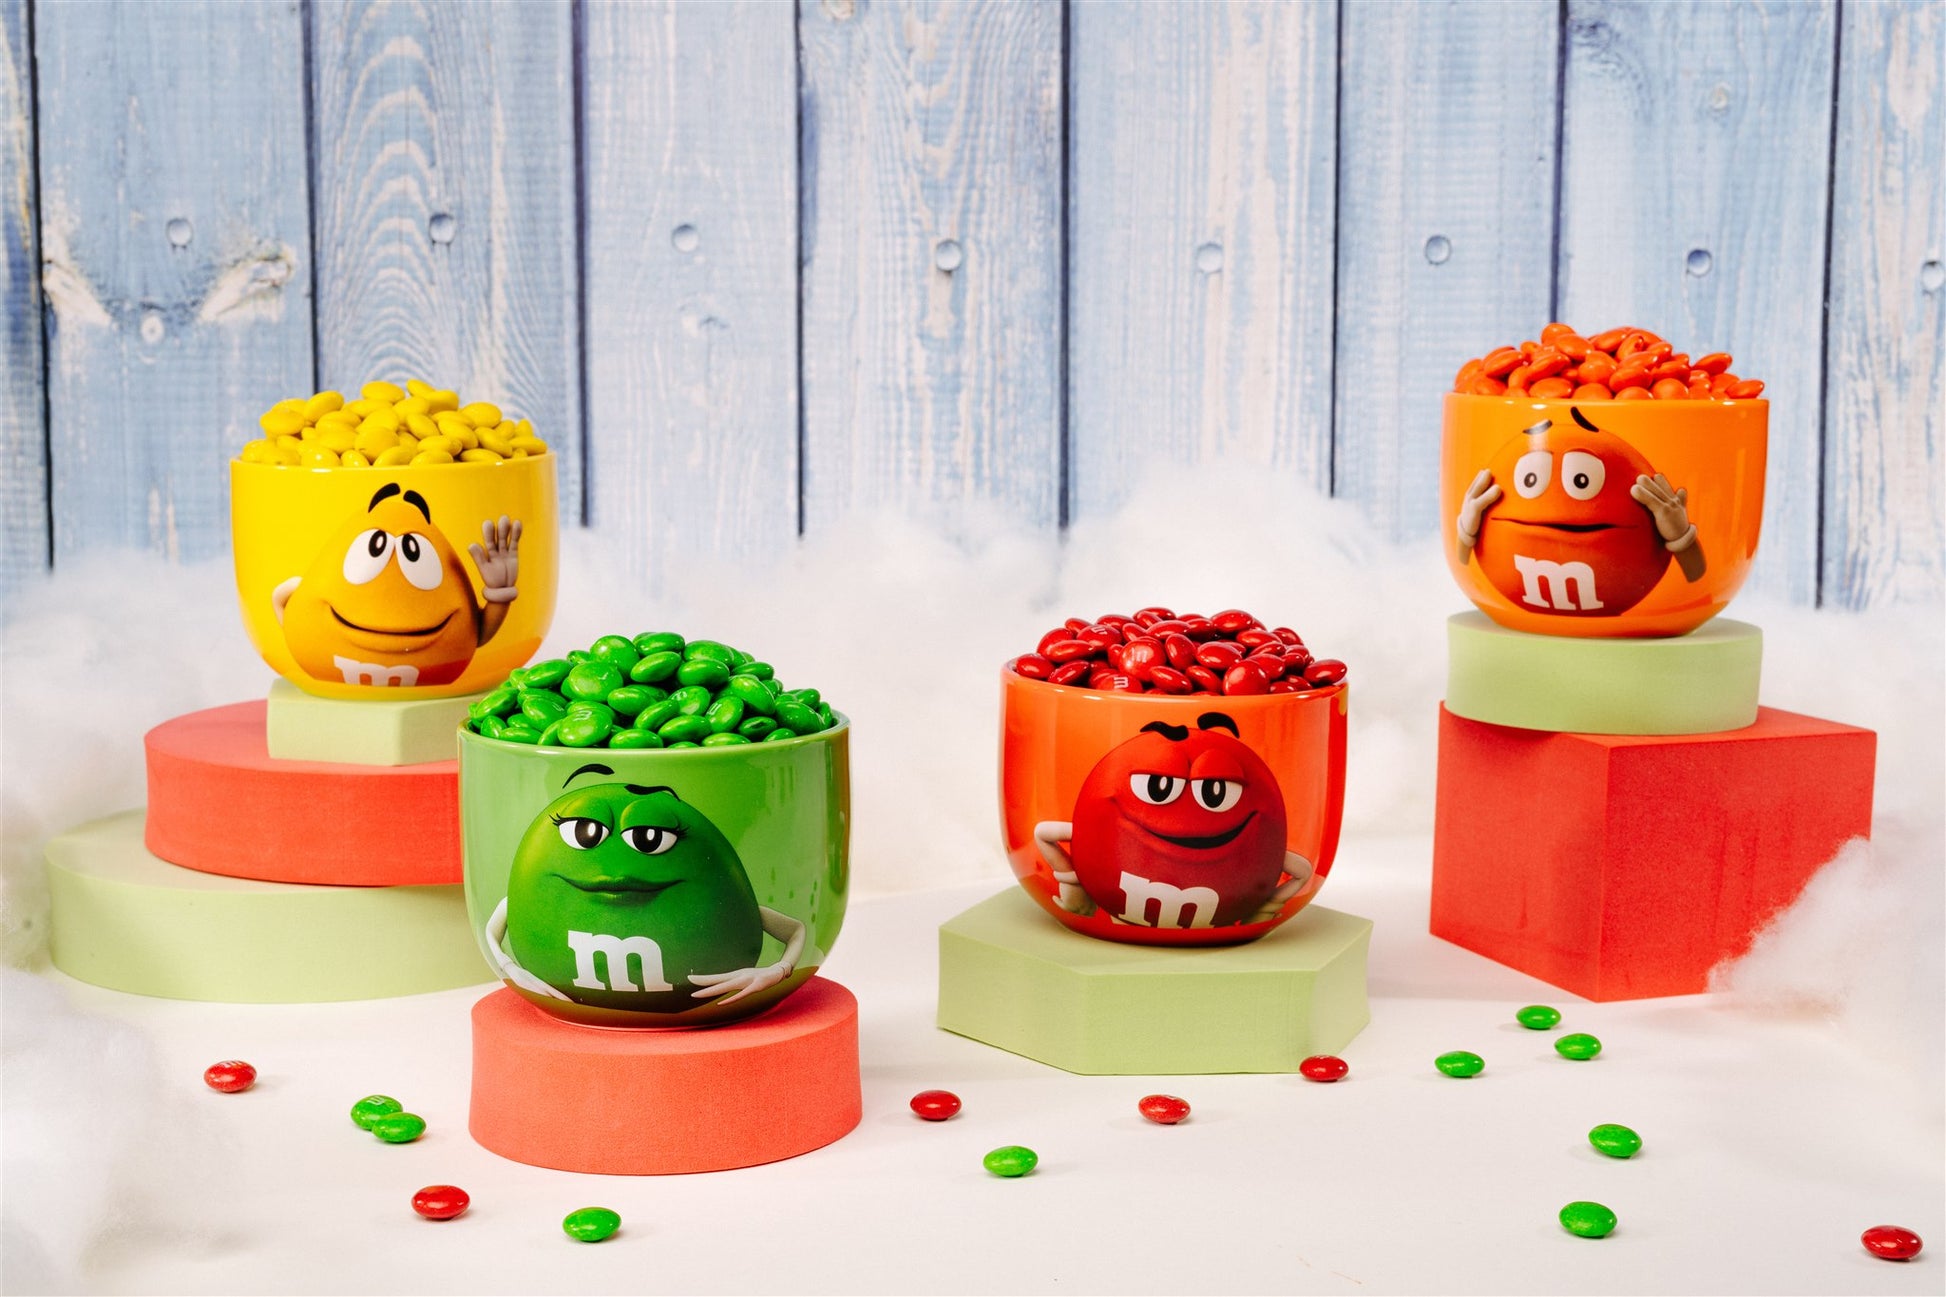 Frankford M&M's Holiday Ice Cream Bowl Gift Set 4 Pack, 2.15oz 